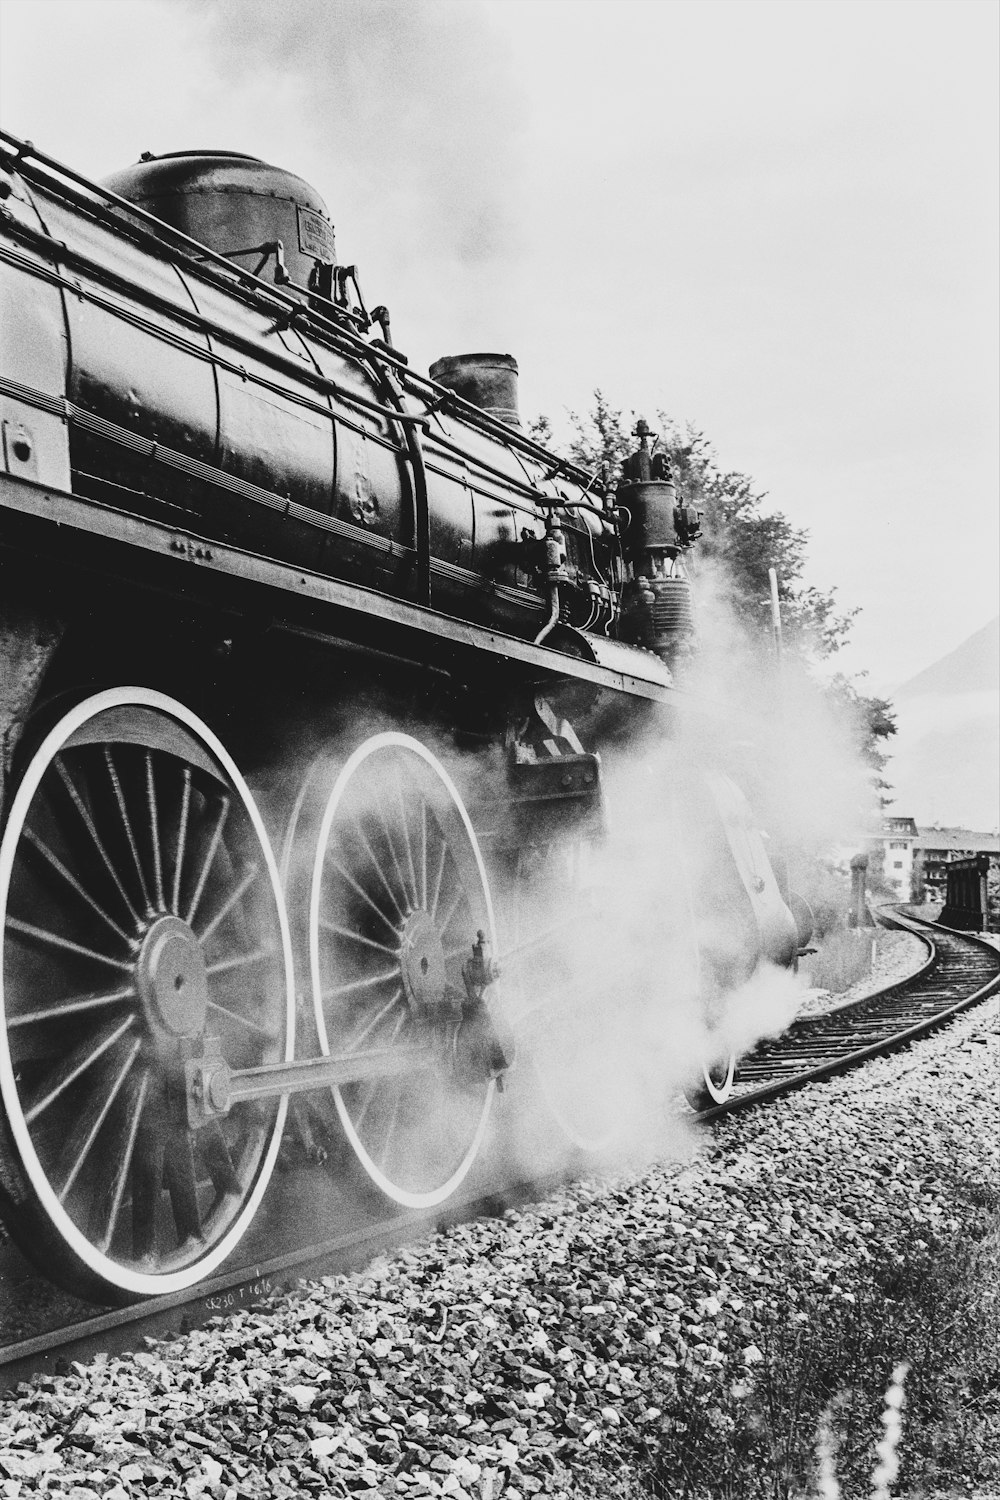 greyscale photography of train